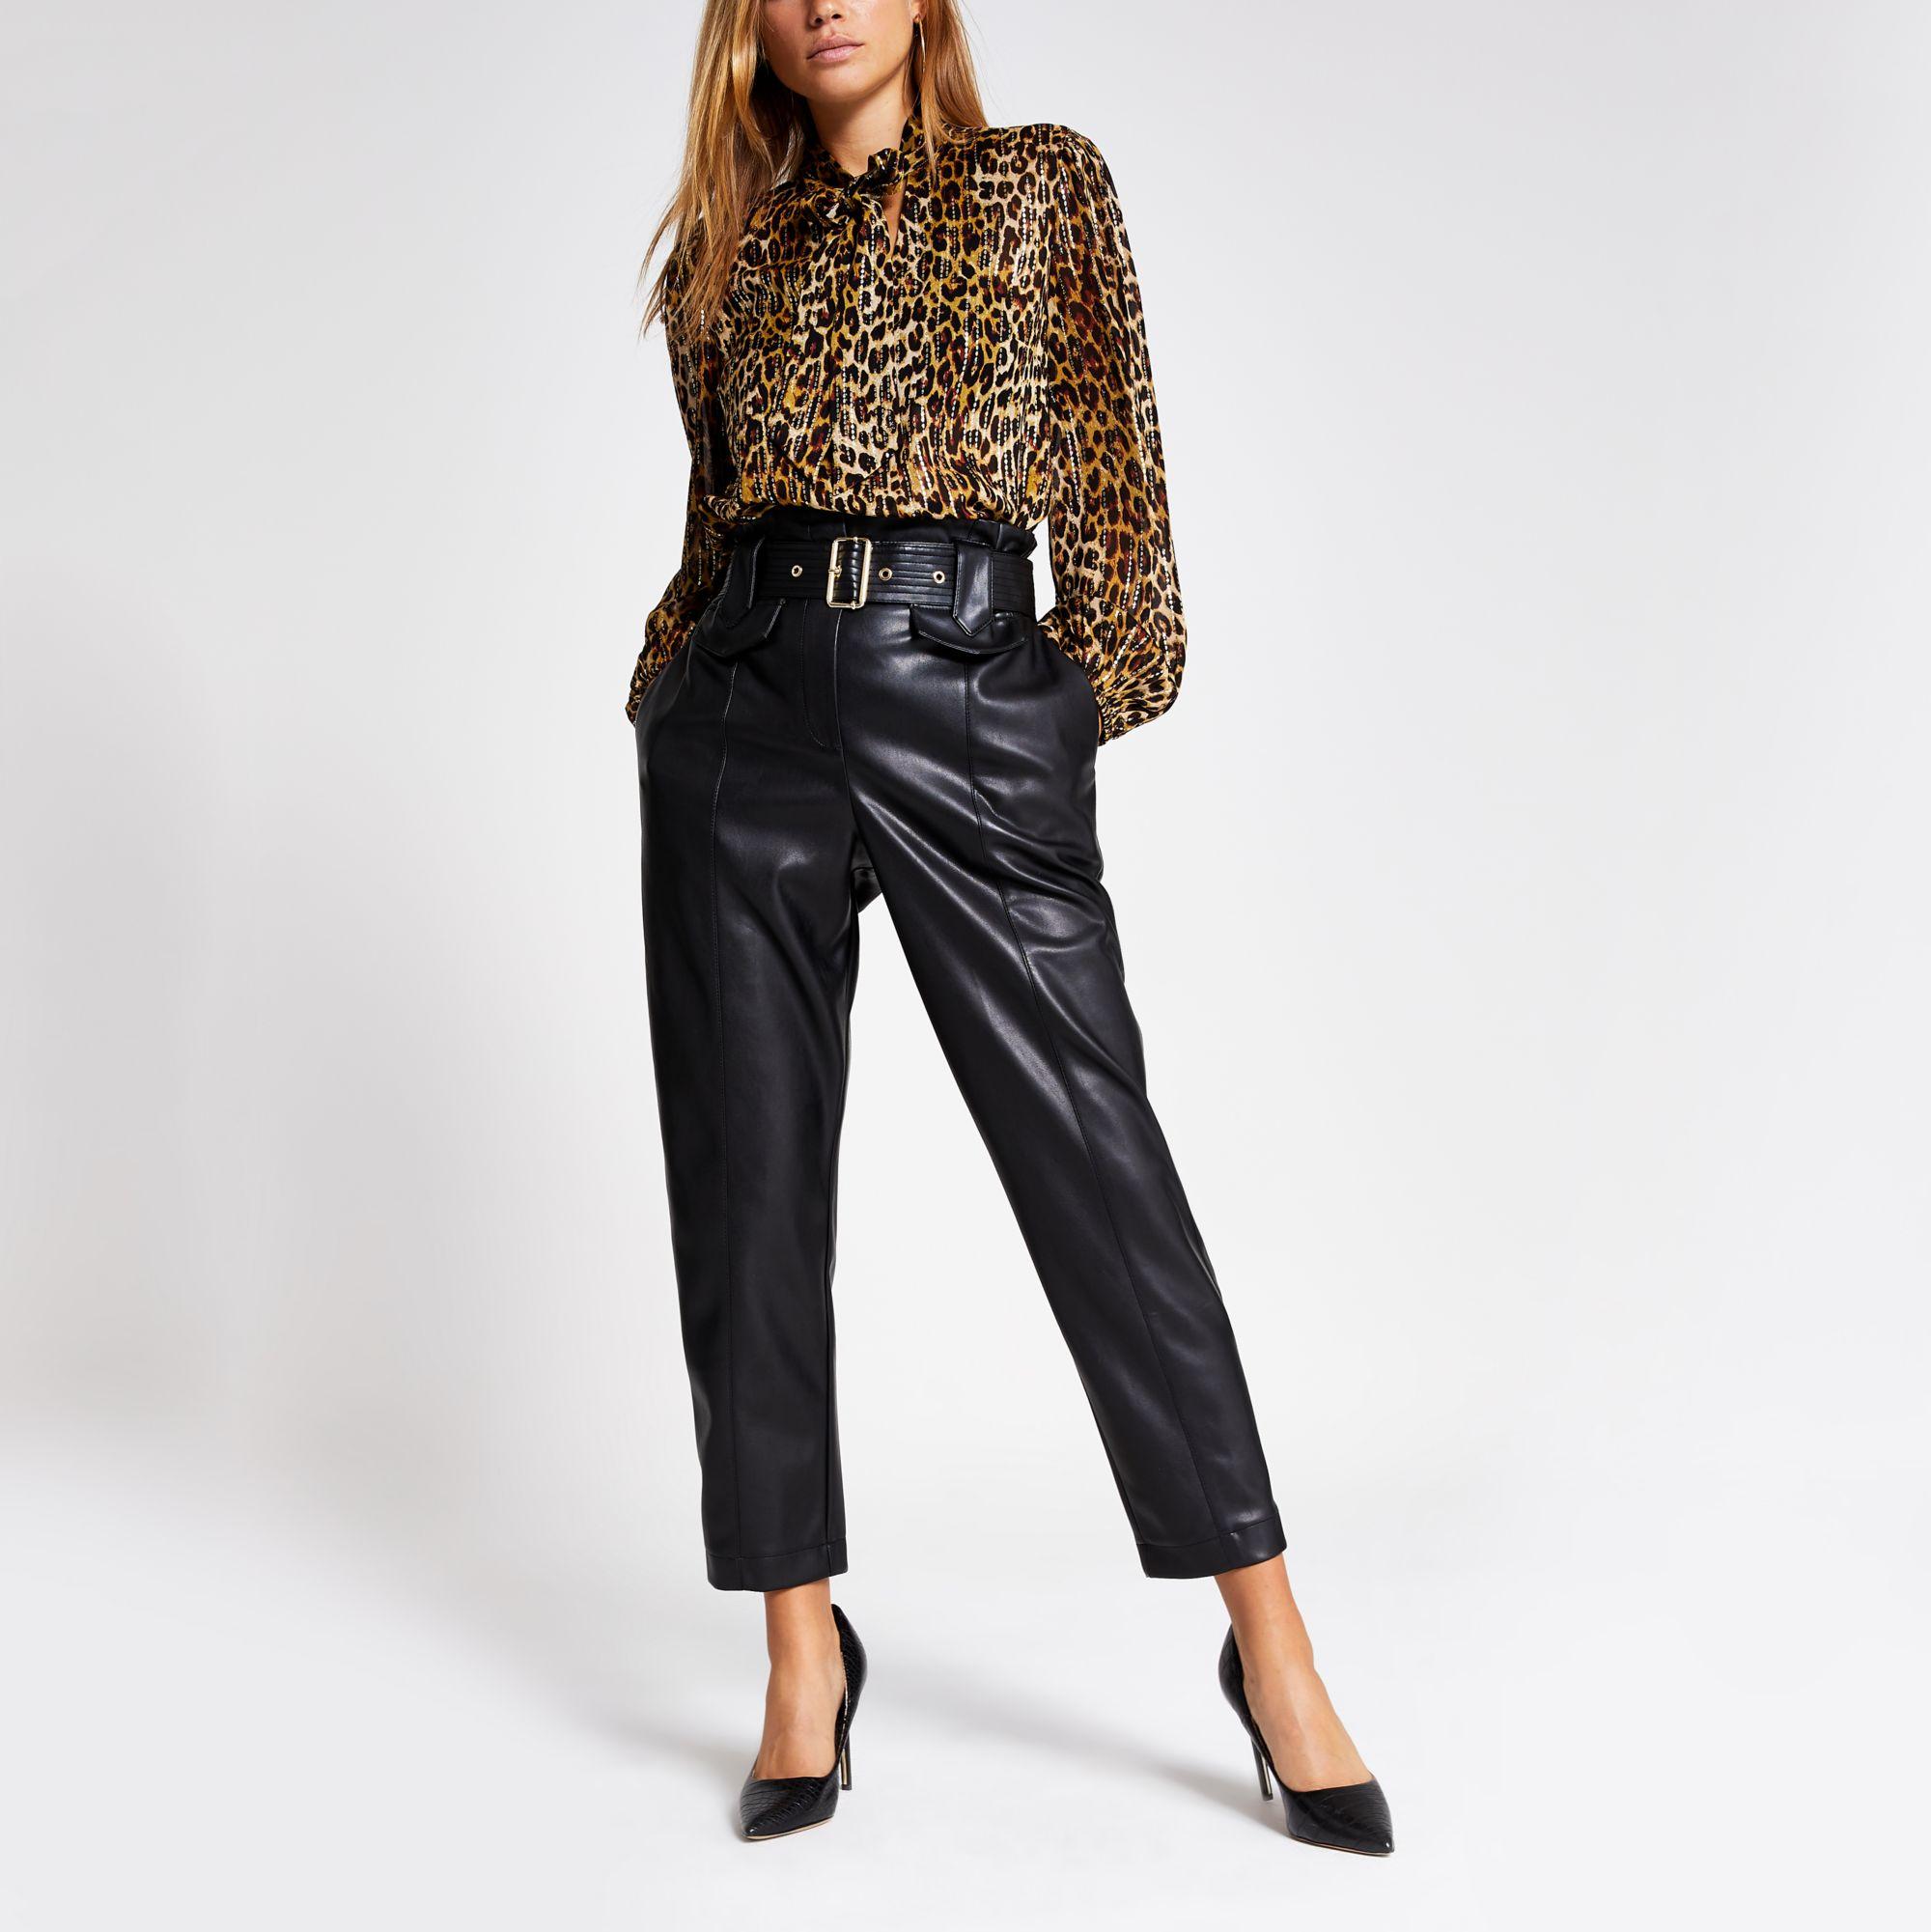 River Island Faux Leather High Waist Belted Trousers in Black - Lyst